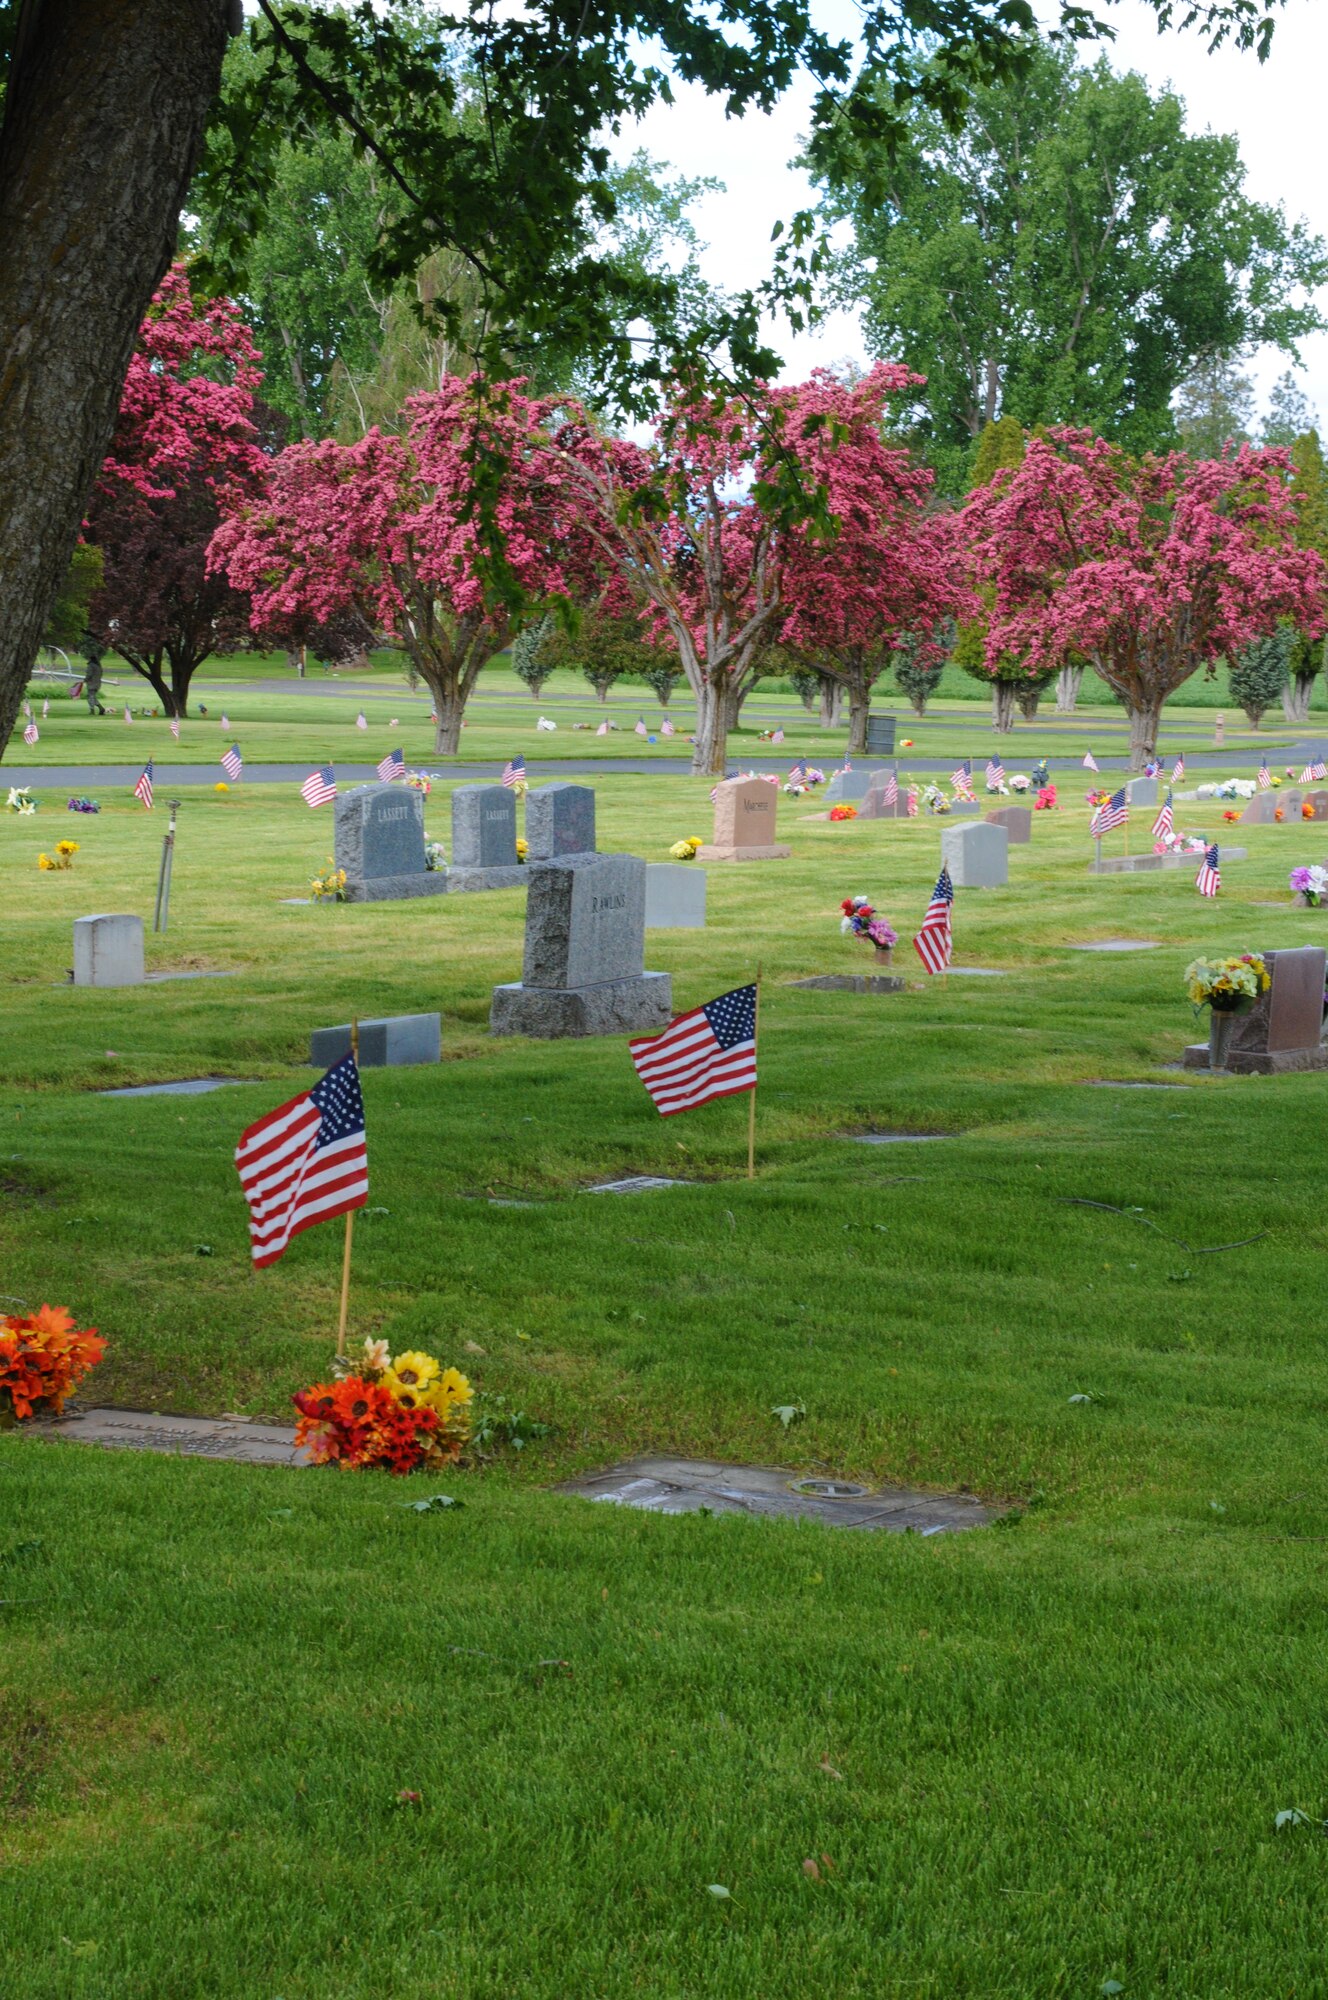 U.S. flags decorate the graves of local veterans at Mount Calvary Cemetery in Klamath Falls, Ore. May 23, 2013.  Airman from the 173rd Fighter Wing spent their morning placing flags in honor of Memorial Day.  (U.S. Air National Guard photo by Master Sgt. Jennifer Shirar) RELEASED    